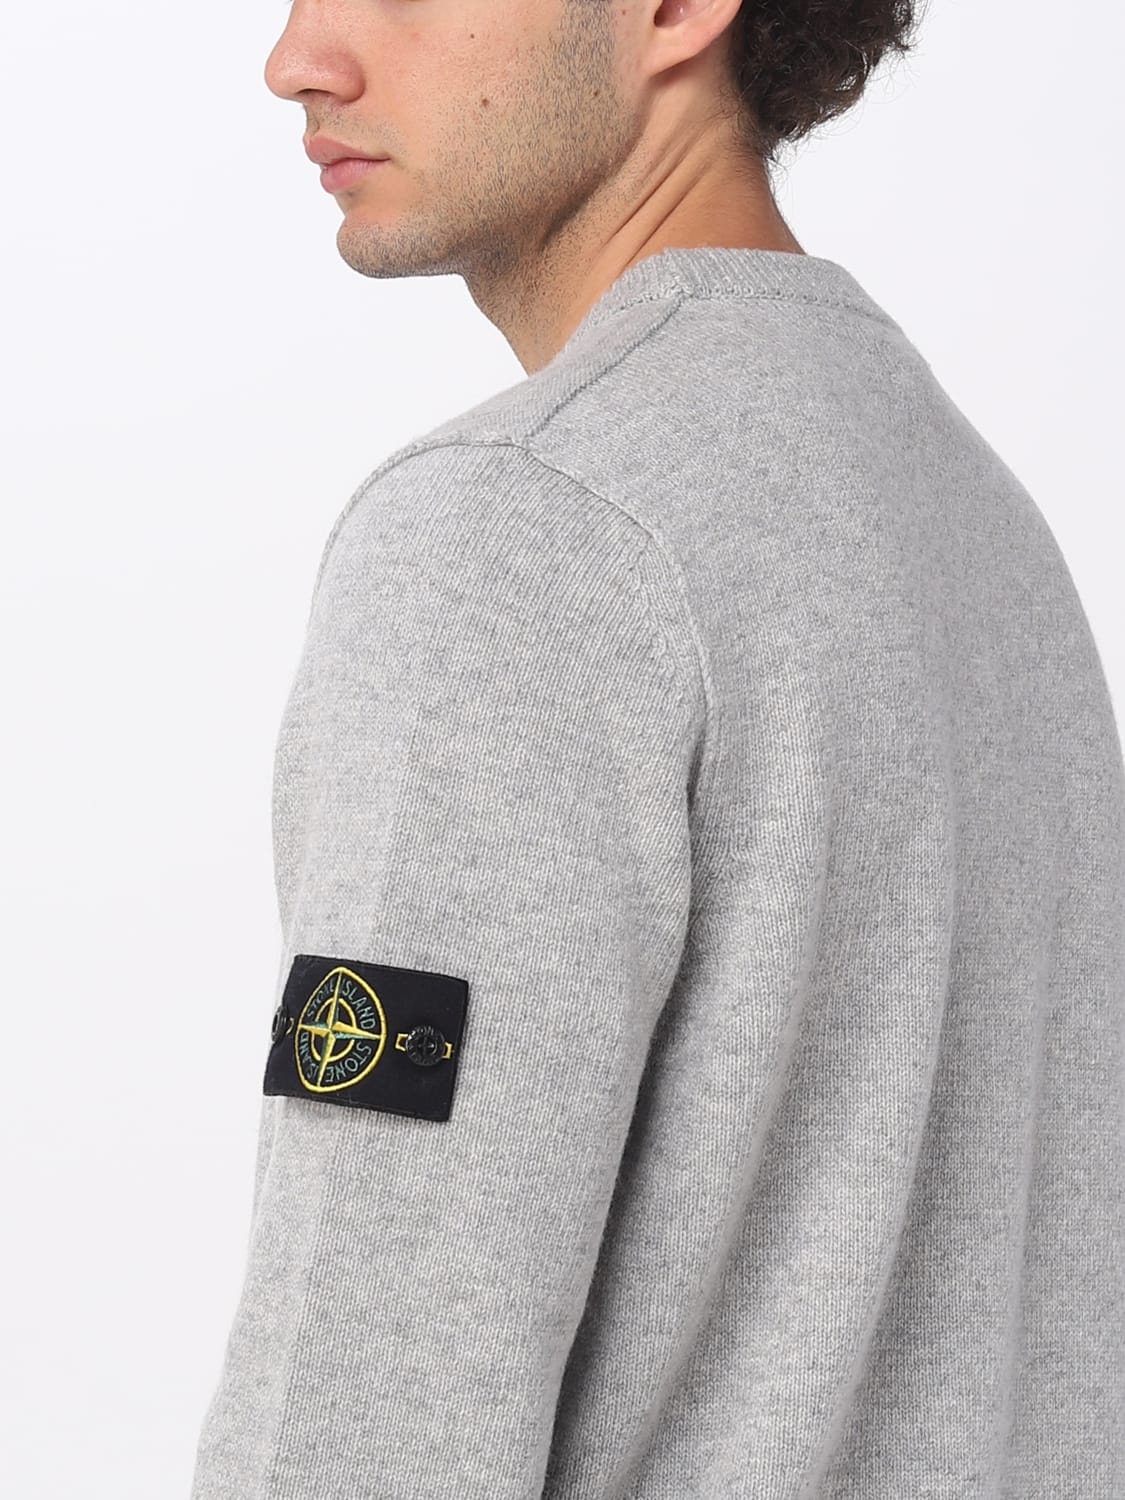 STONE sweater for man - Grey Stone sweater 508A3 online at